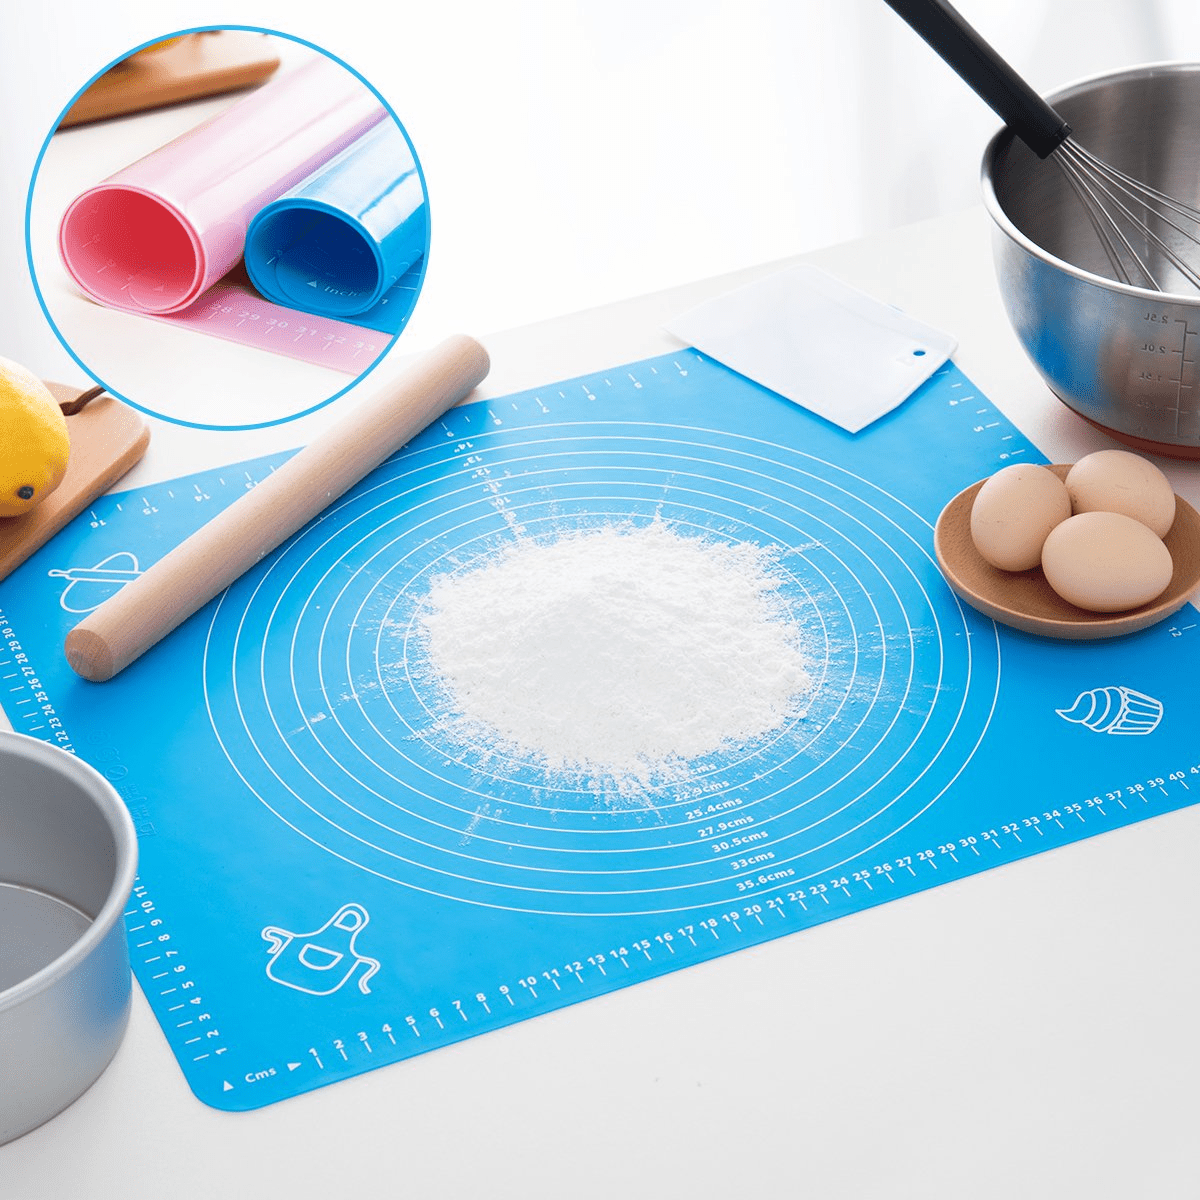  Silicone Pastry Mat Extra Thick Non-stick Baking Mat